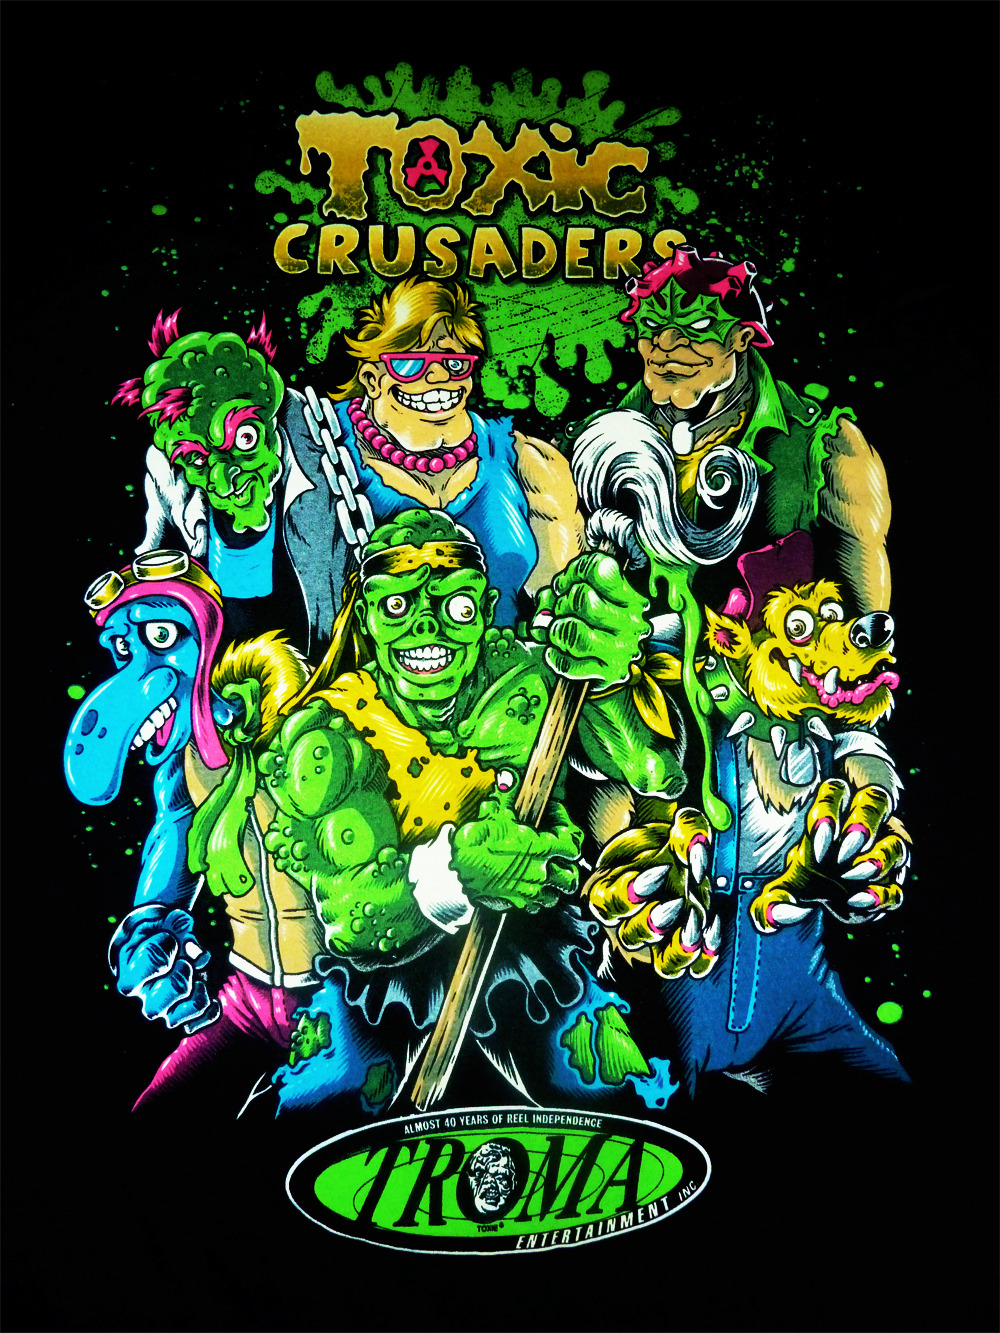 mullhawkmustdie:  Toxic Crusaders Shirt  Purchase Artist: Stephen Bunnell  